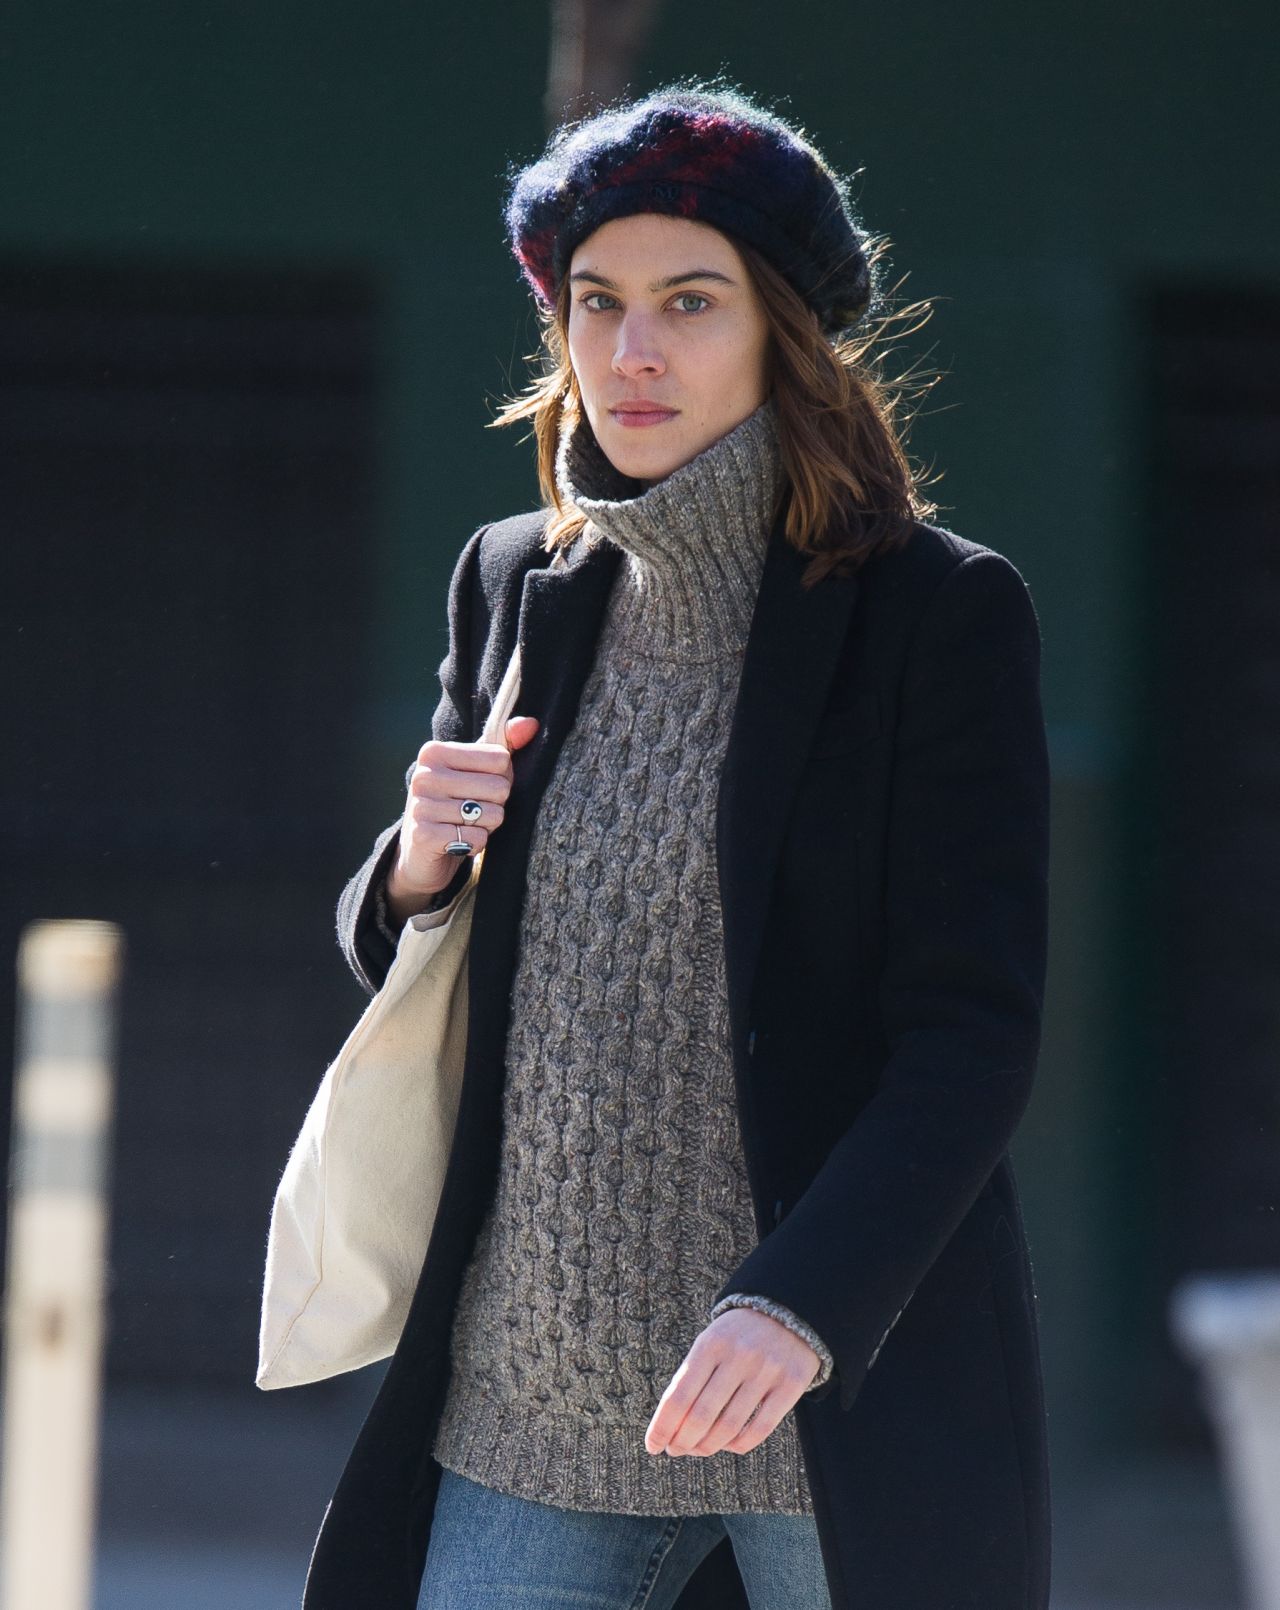 Alexa Chung - Out in New York 3/21/ 2017